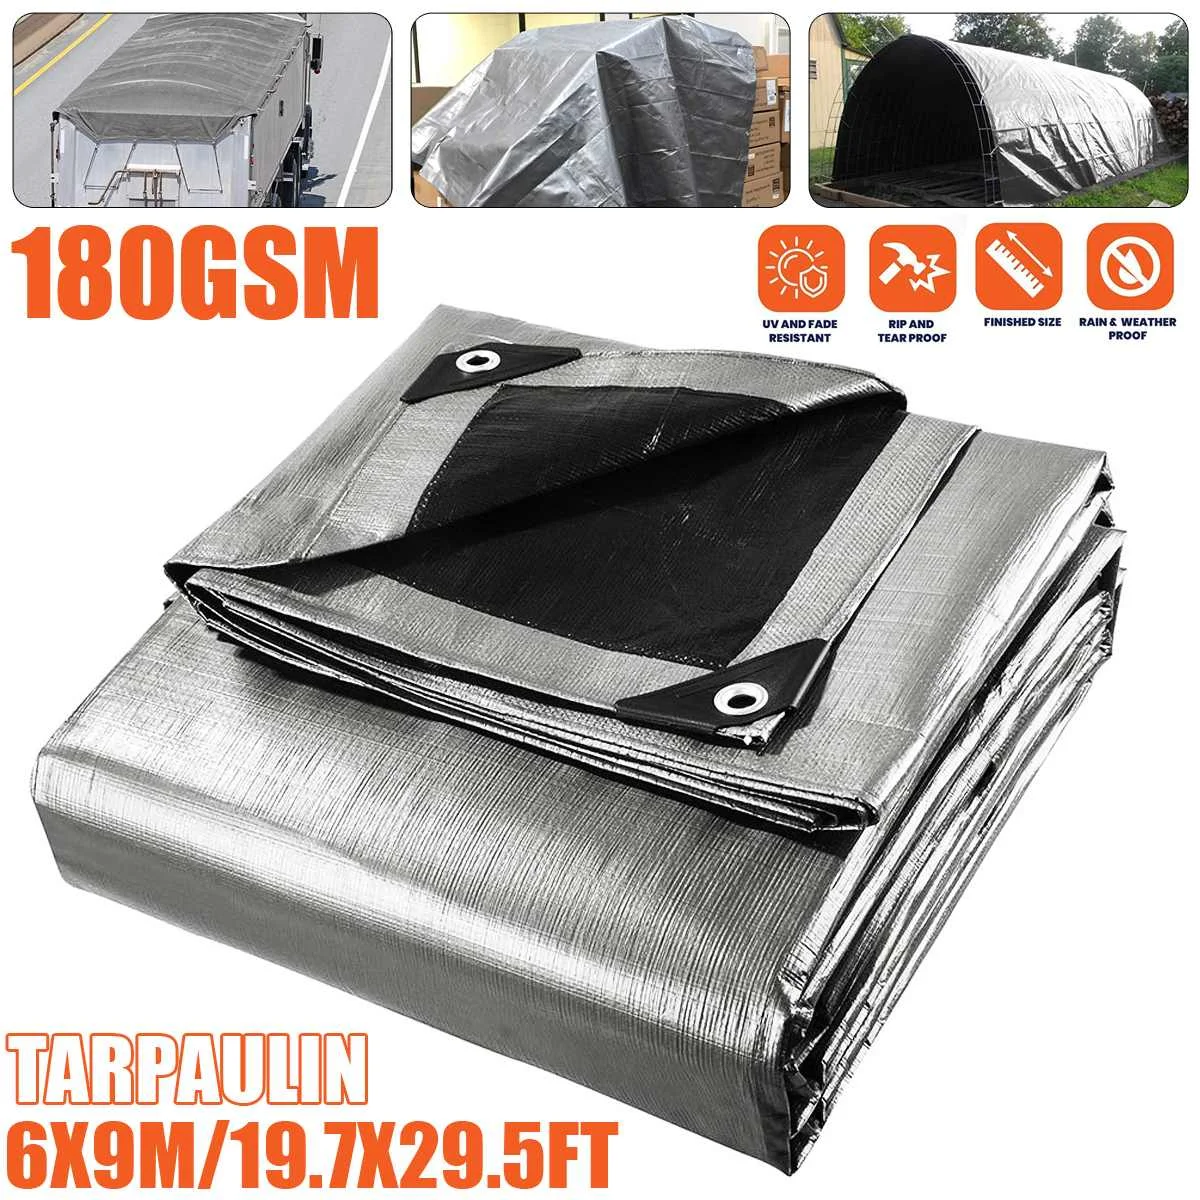 

6x9m PE Tarpaulin Rainproof Cloth Outdoor Garden Plant Shed Boat Car Truck Canopys Waterproof Shading Sail Pet Dog House Cover